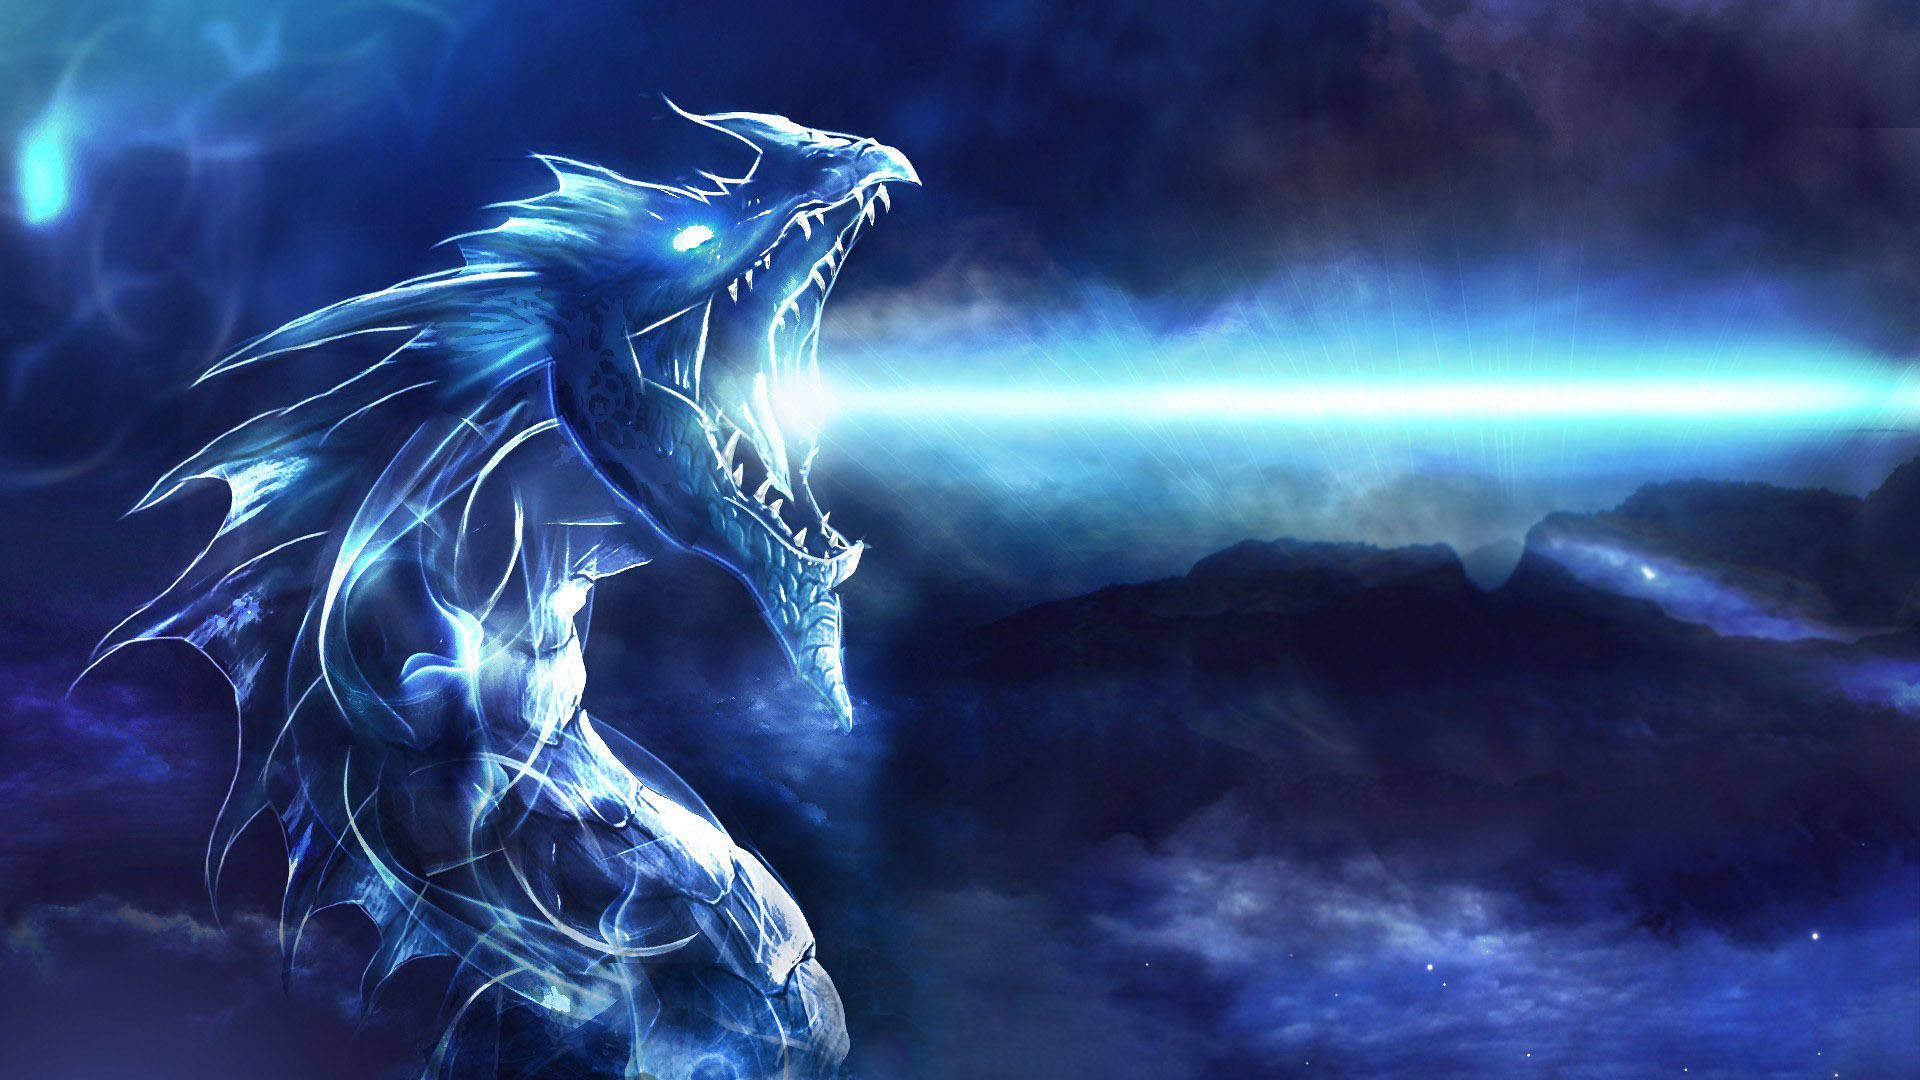 Cool Dragon Blue Flame Background